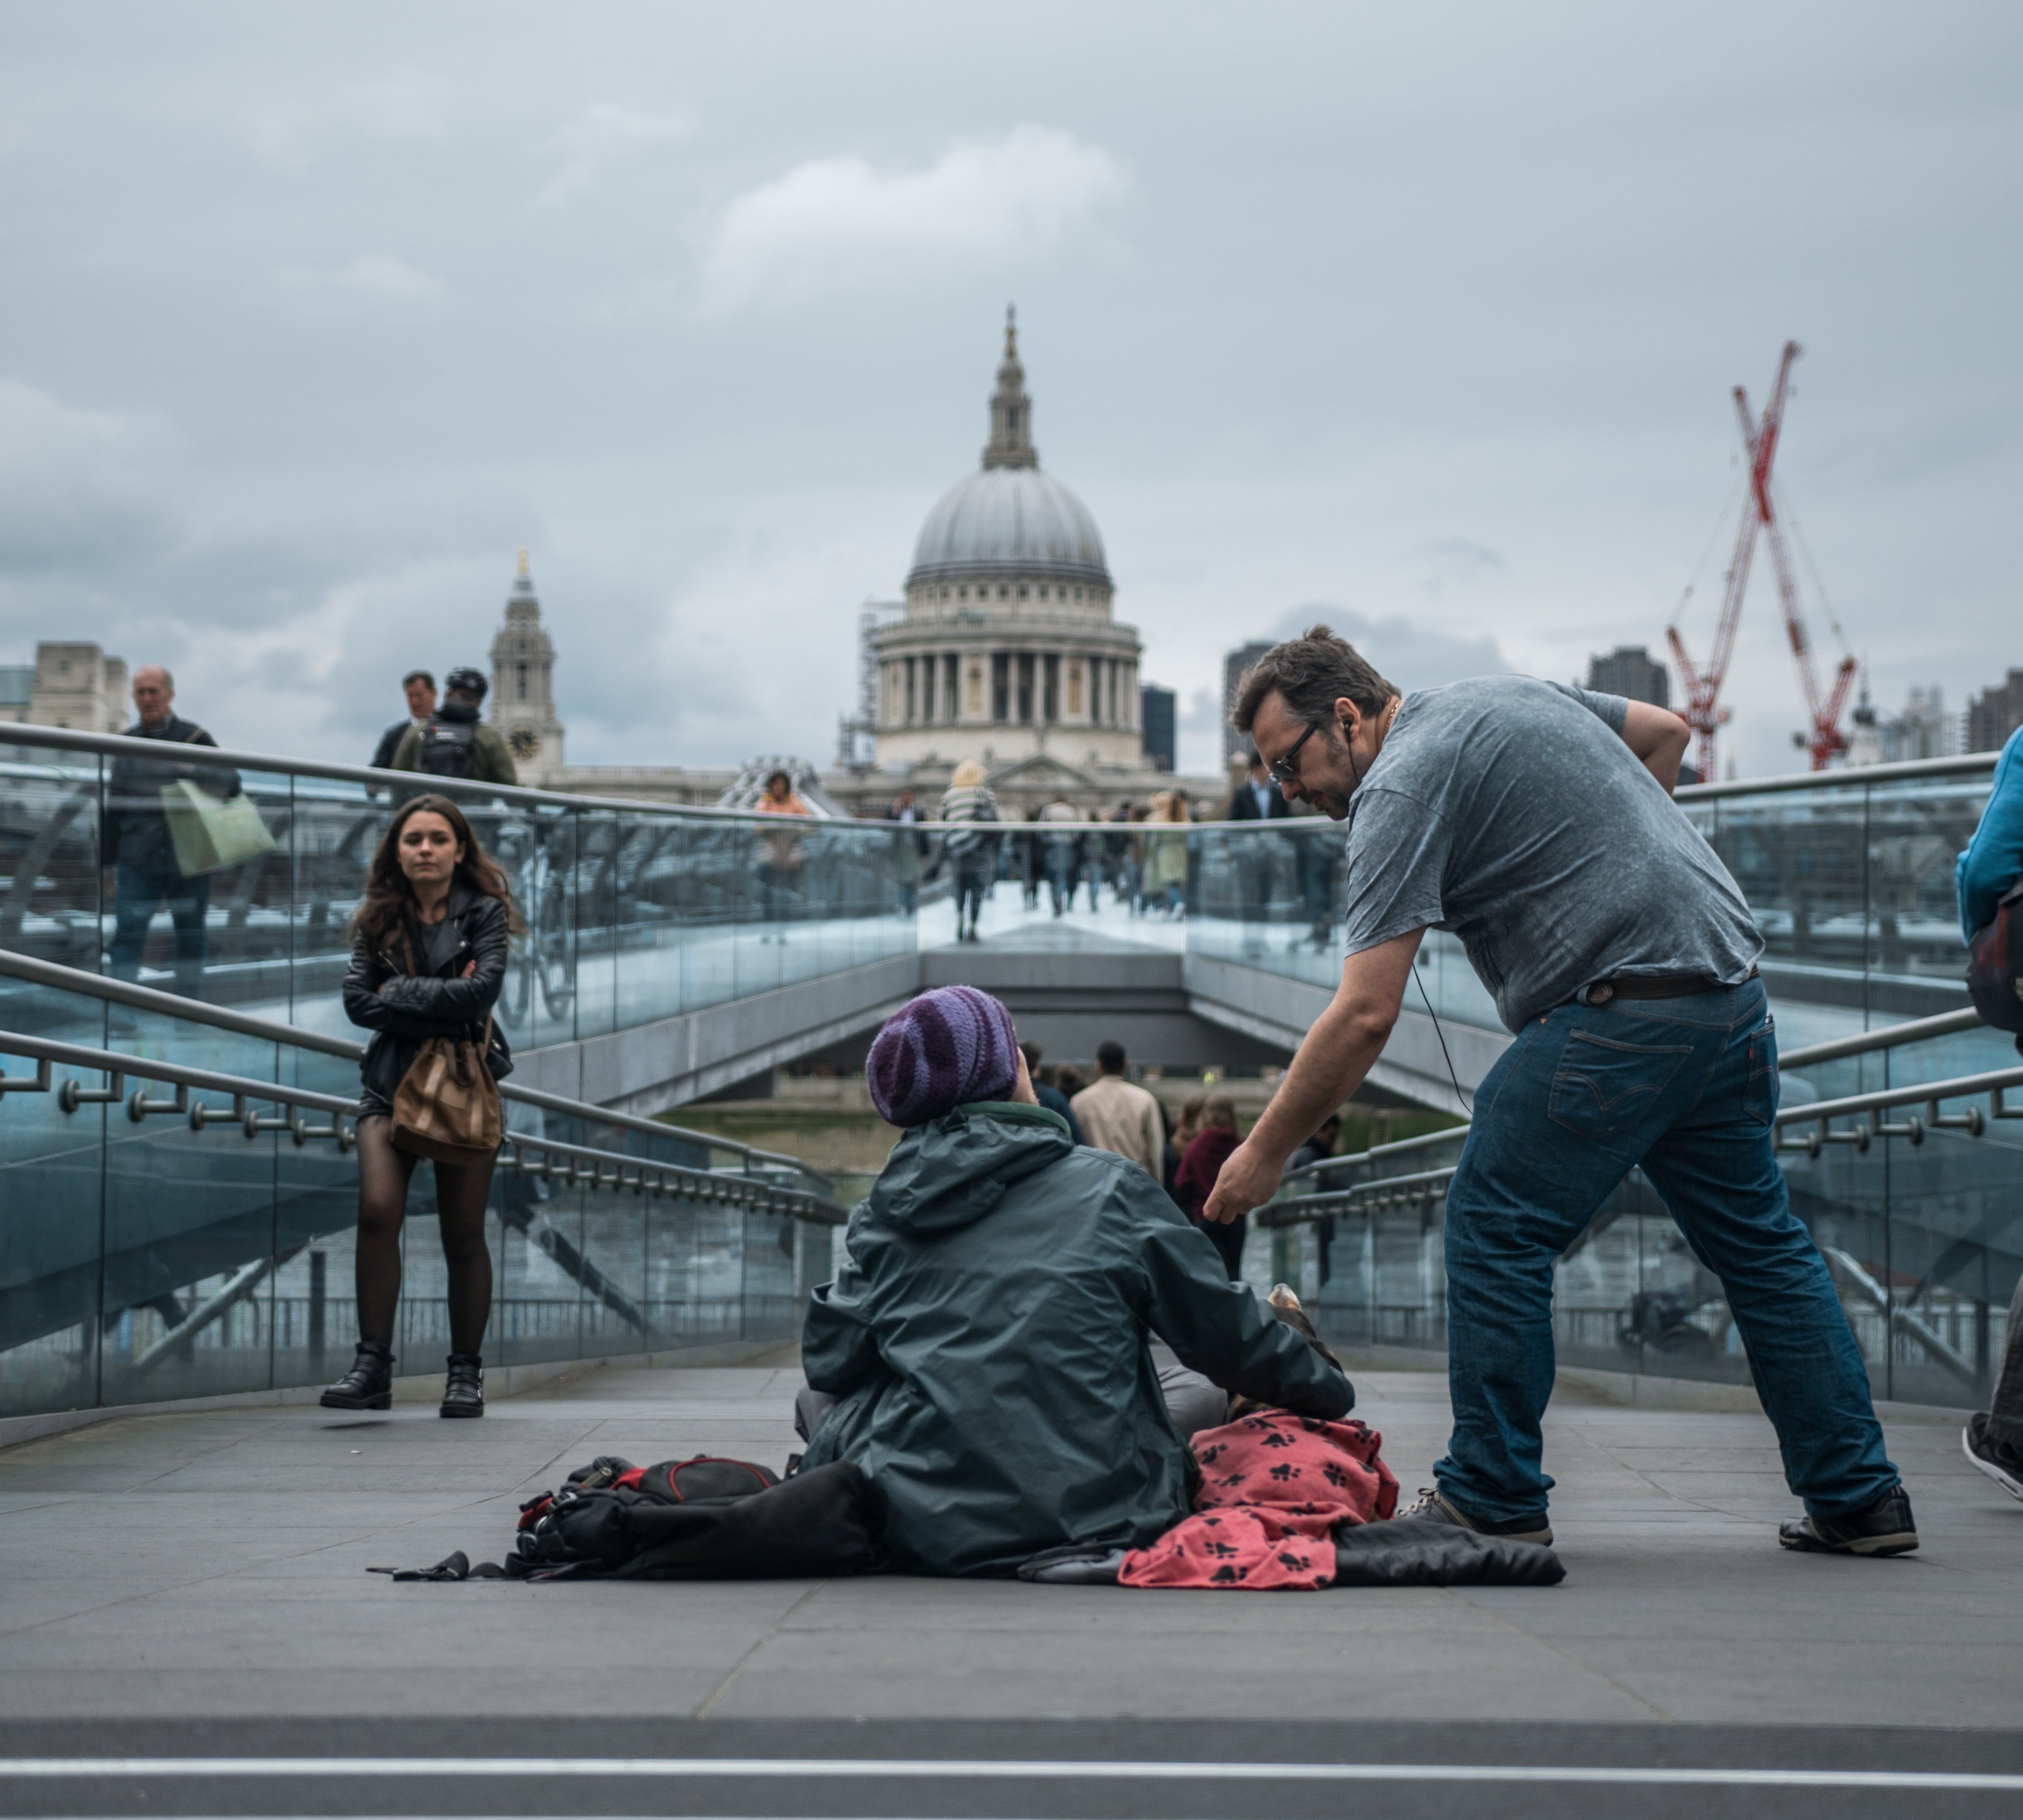 Man helps a homeless person | Photo: Unsplash